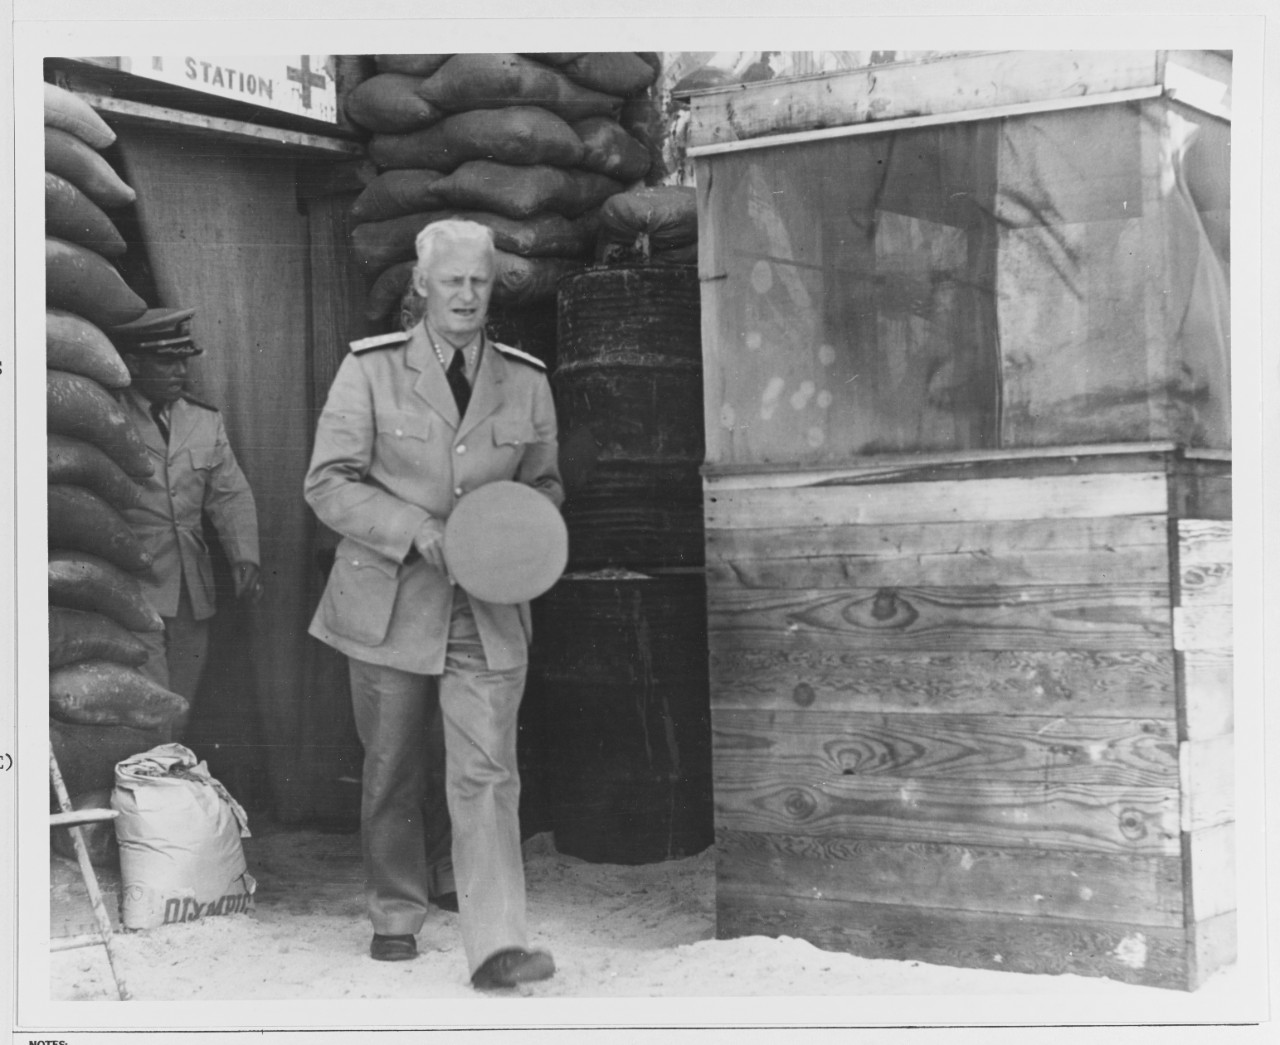 Admiral Nimitz Inspects a Red Cross Station